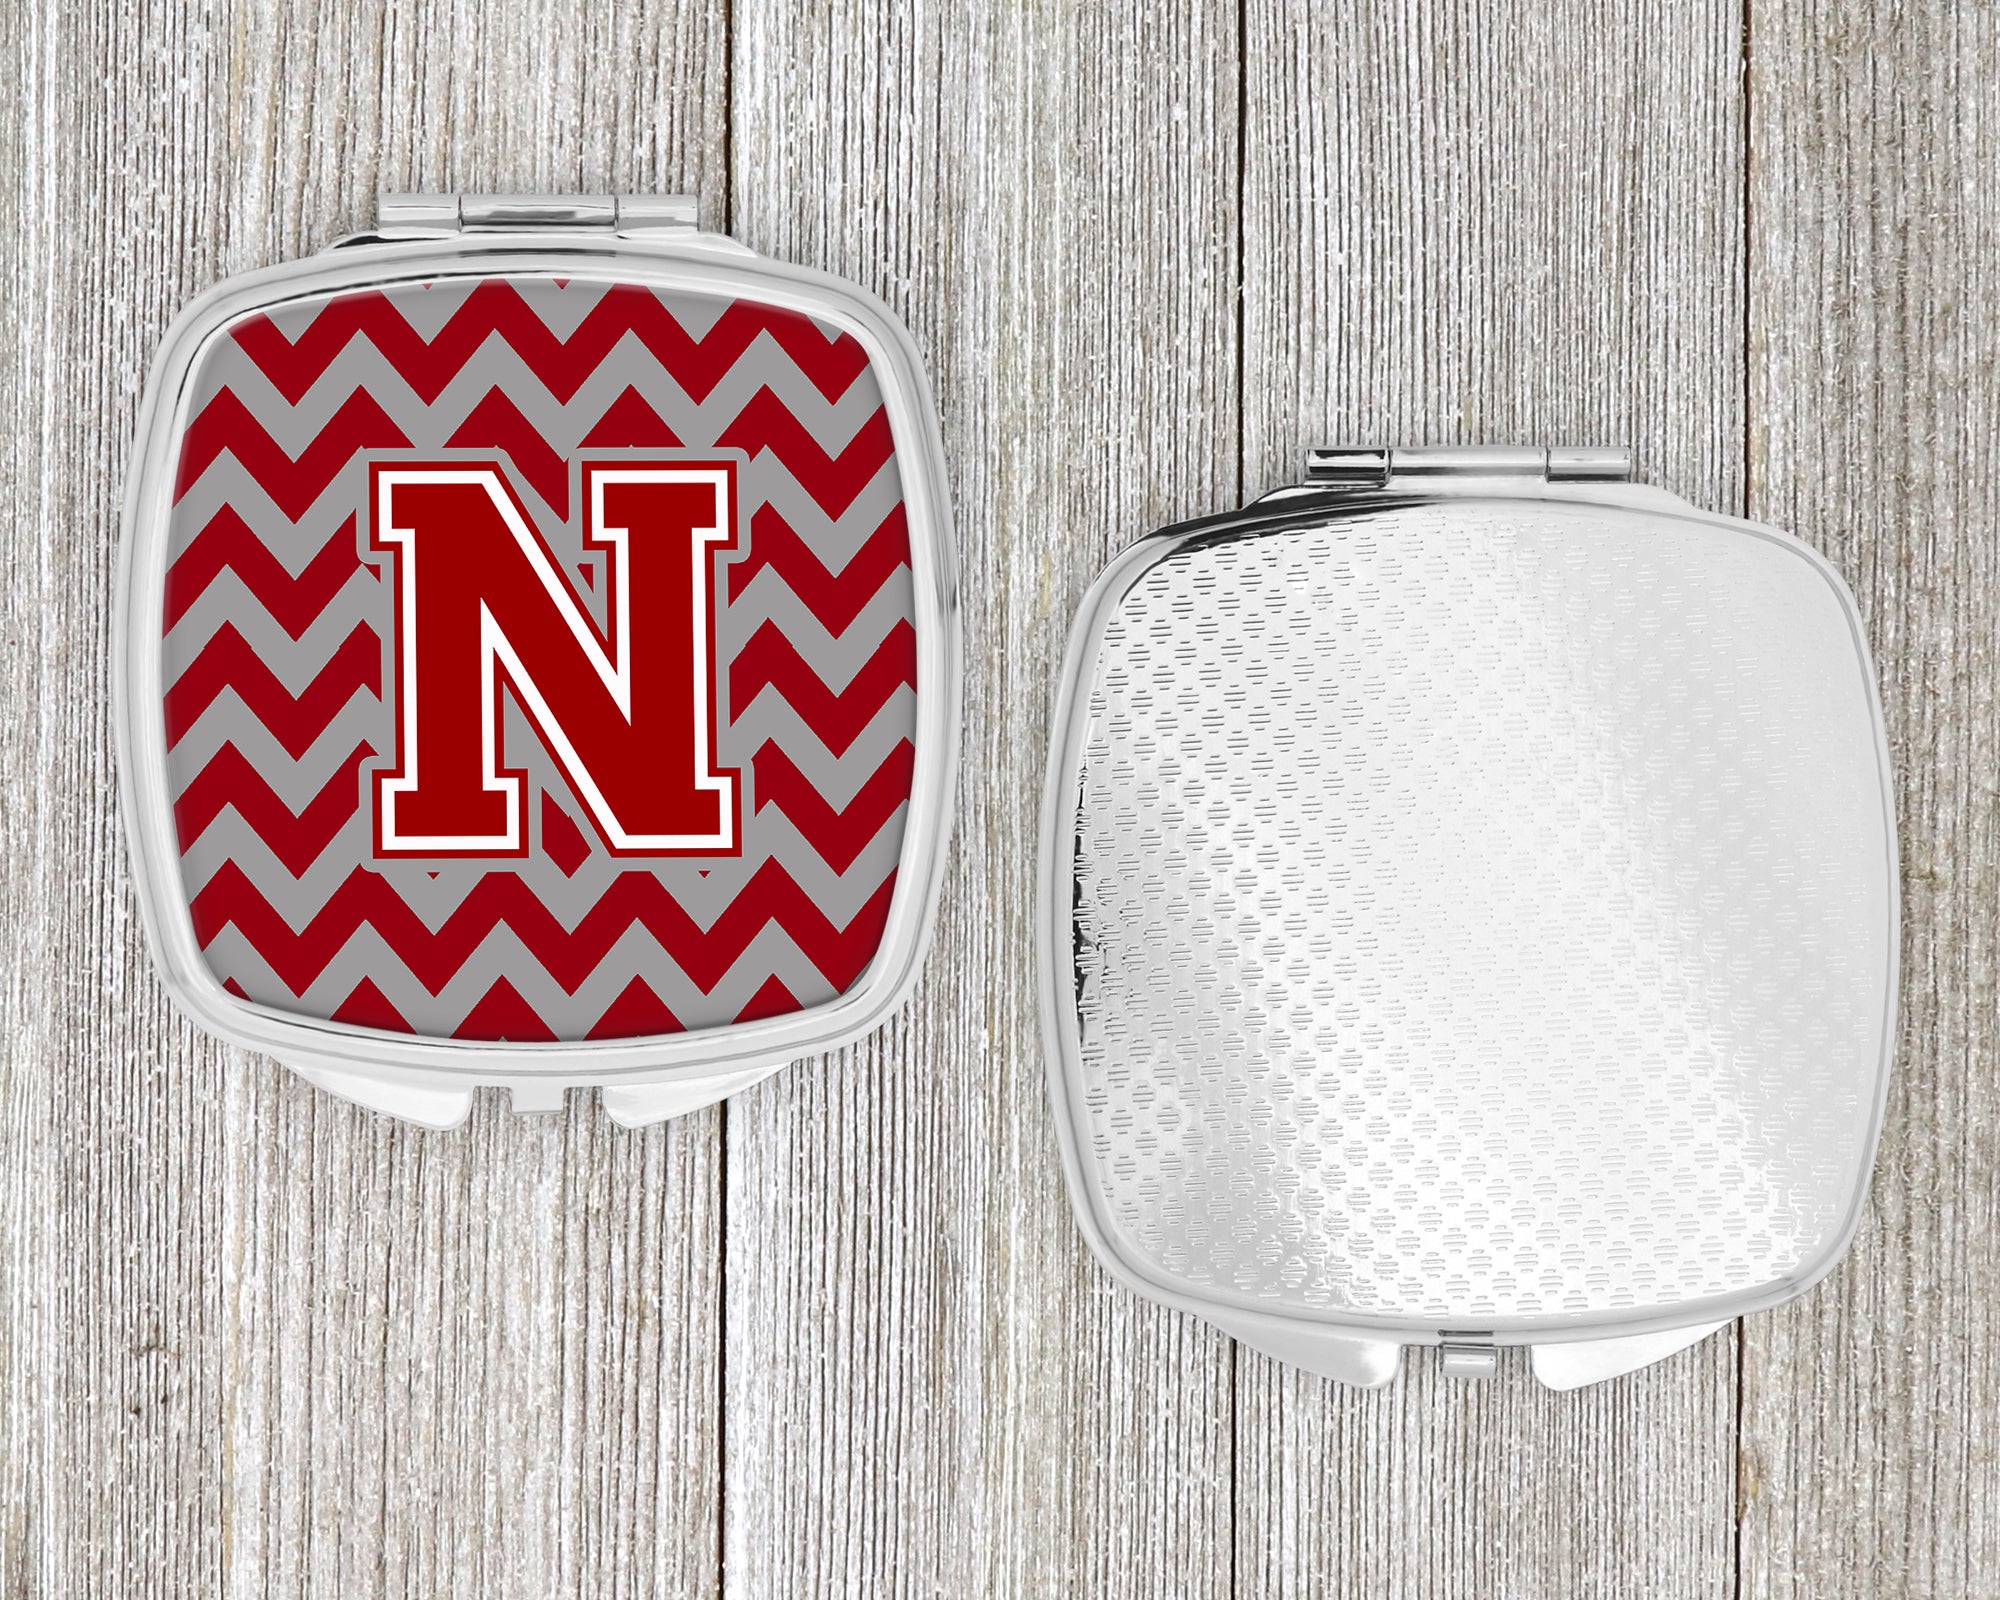 Letter N Chevron Maroon and White Compact Mirror CJ1049-NSCM